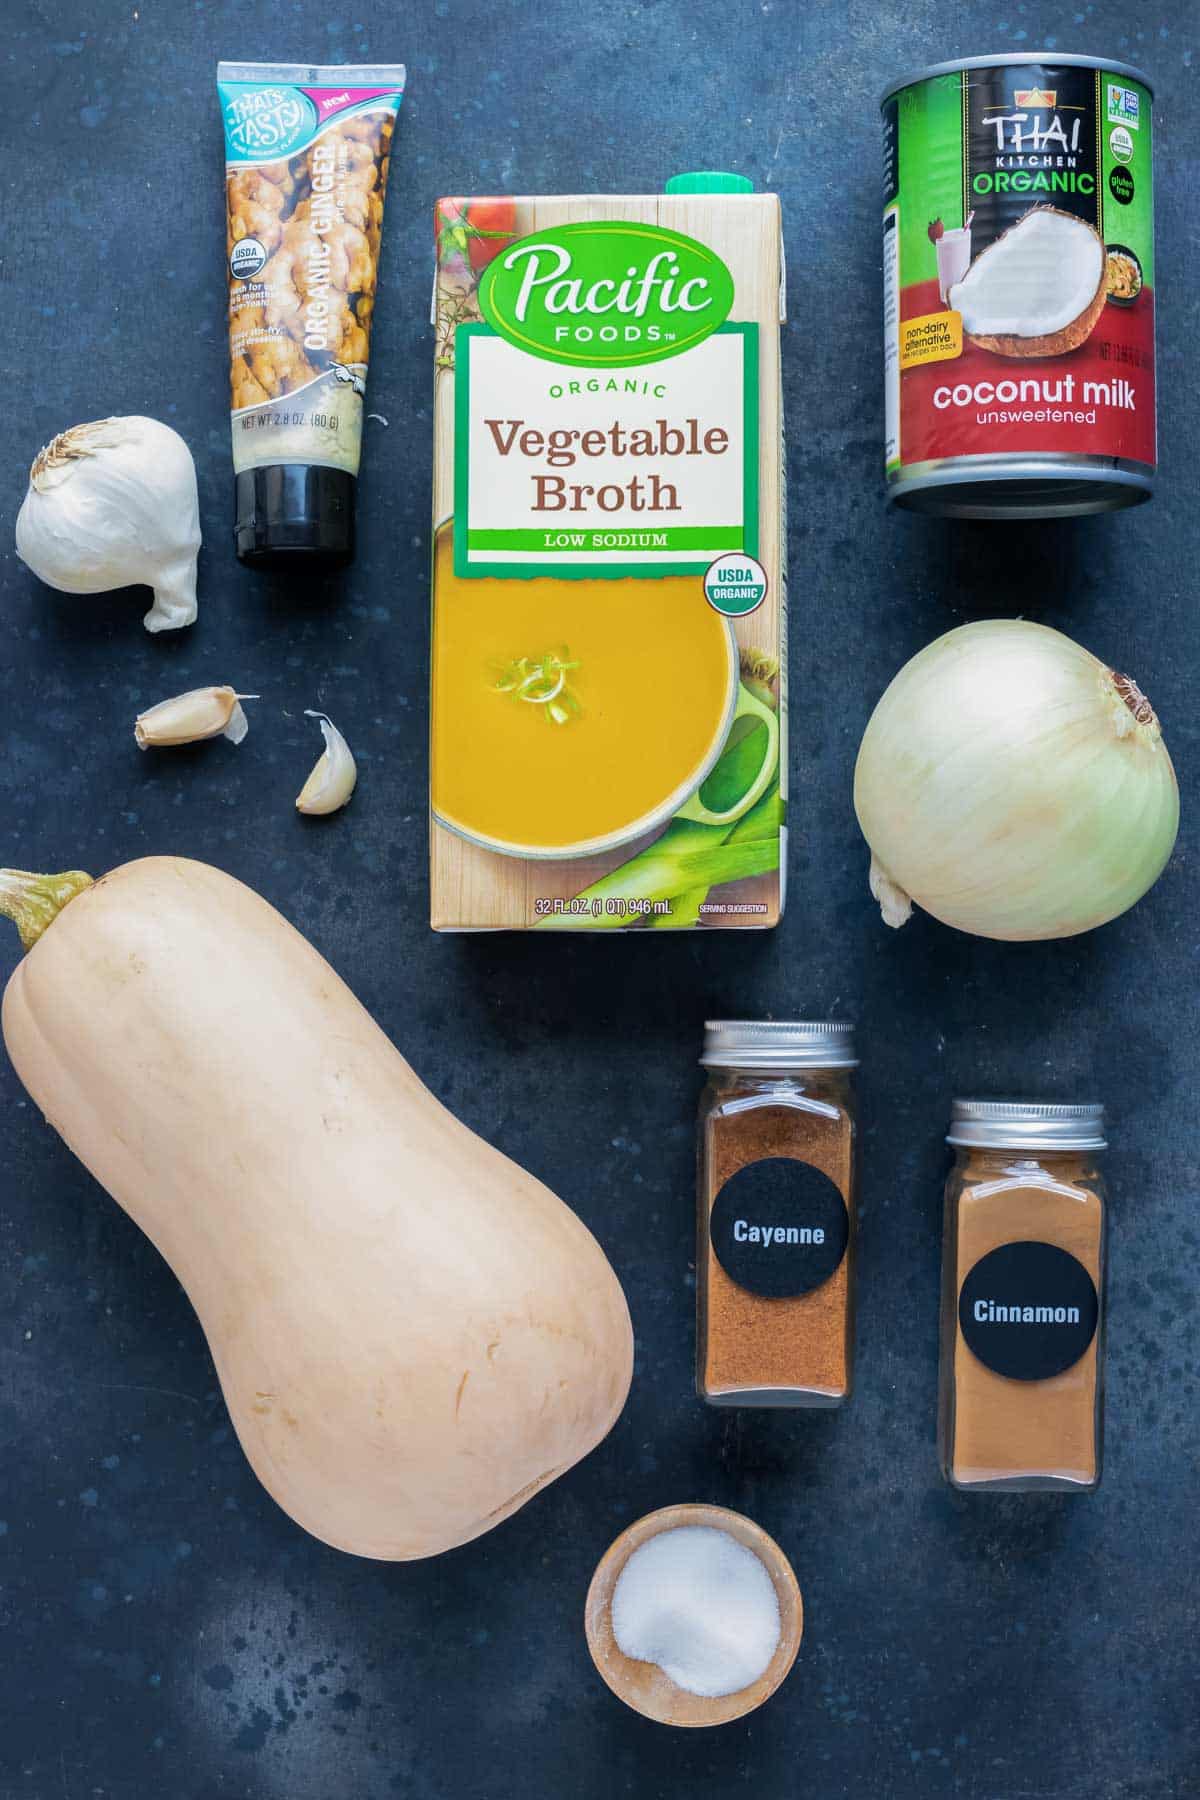 Butternut squash, coconut milk, onion, ginger, garlic, vegetable broth, and spices as the ingredients for a roasted butternut squash soup recipe.